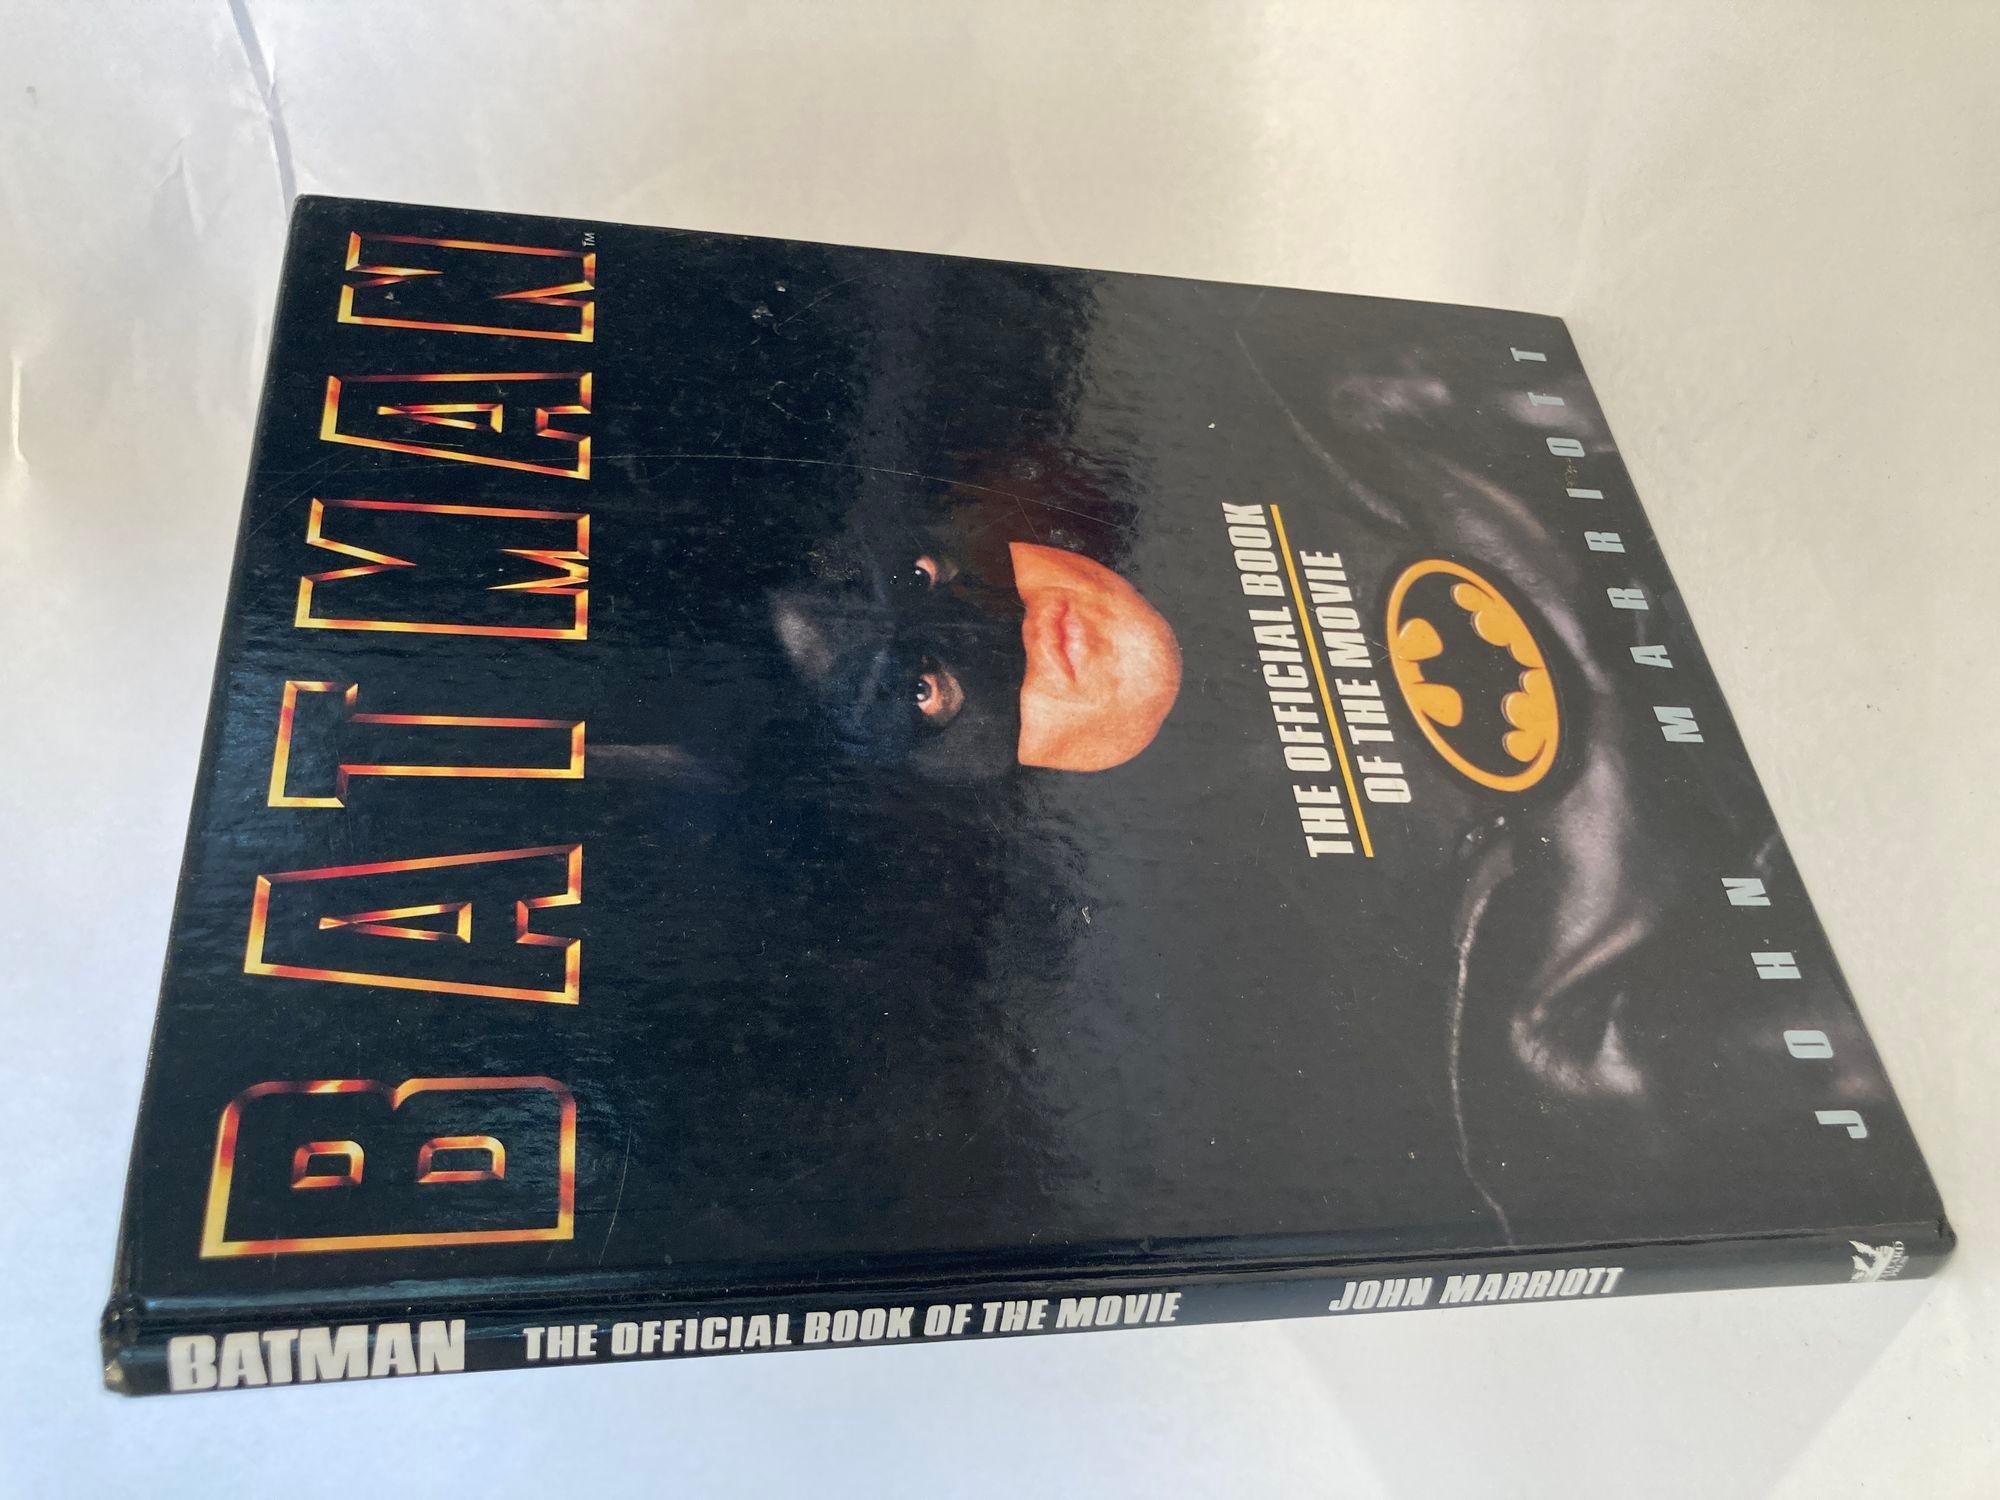 Batman: the Official Book of the Movie by John Marriott Hardcover, 1989 For Sale 10